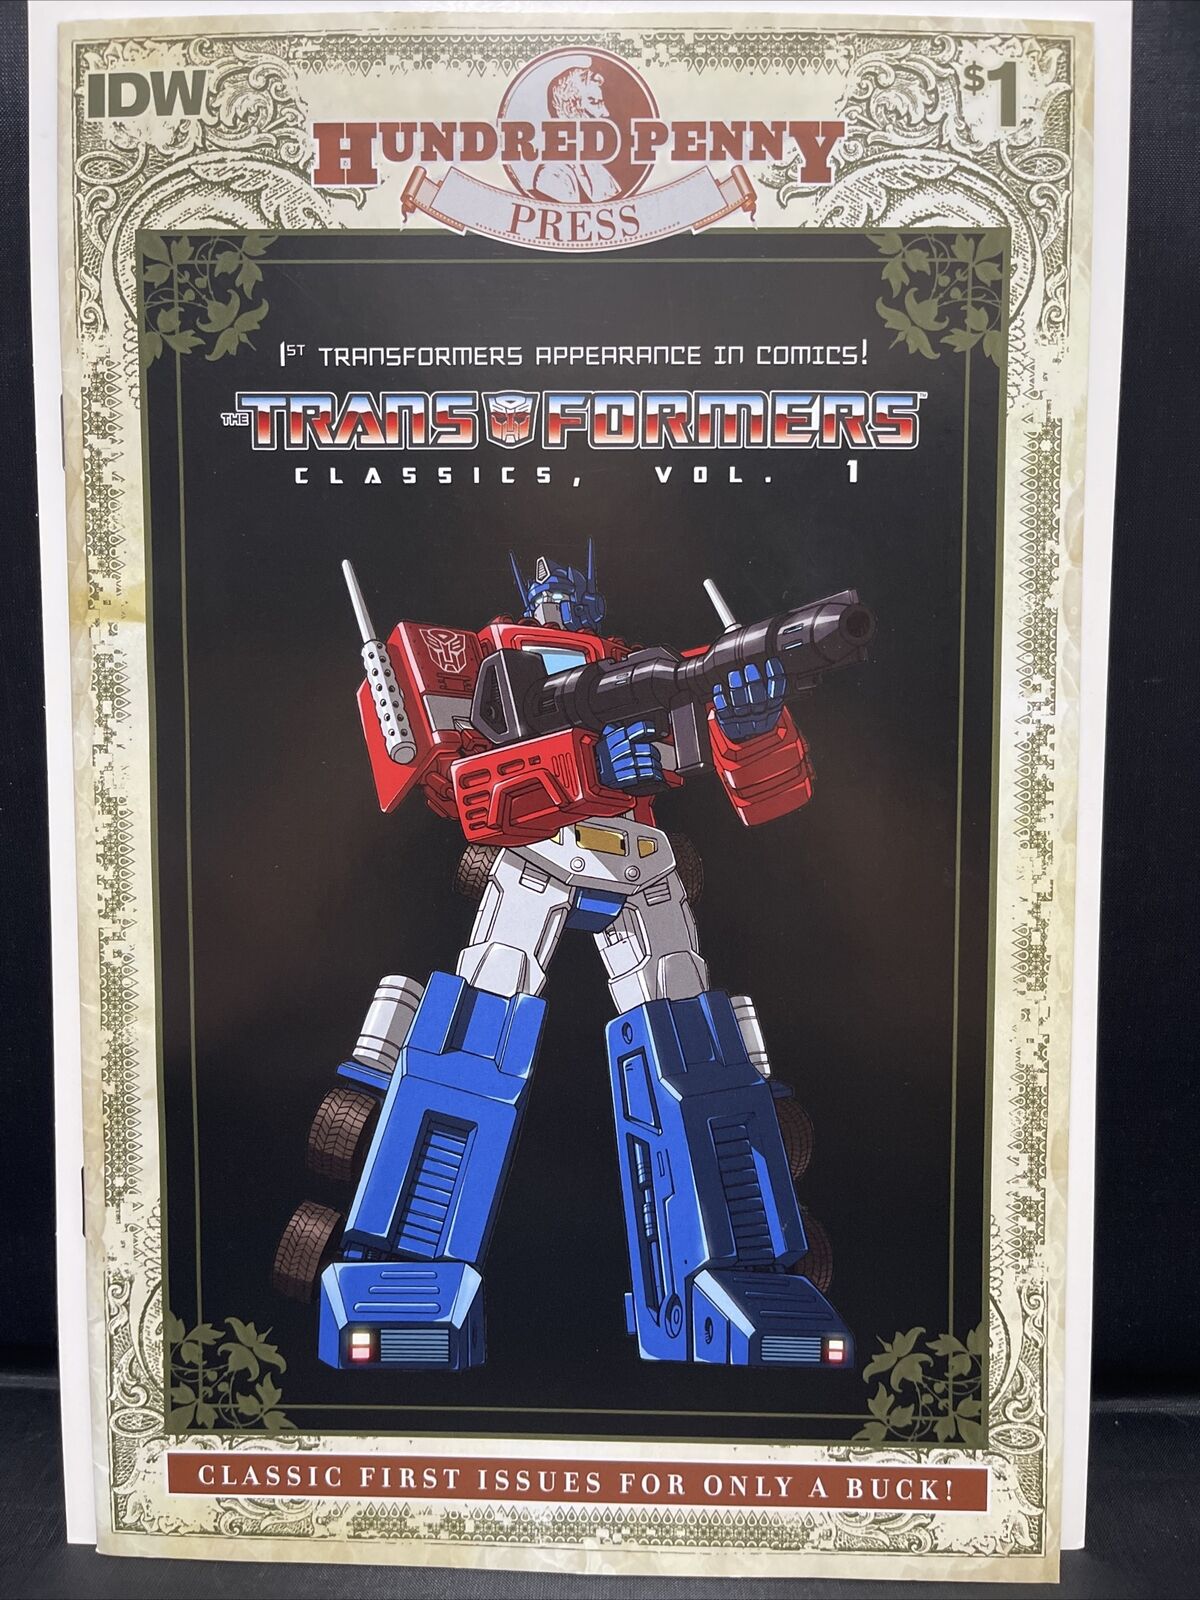 2011 IDW Hundred Penny Press Transformers Classics #1 First Printing